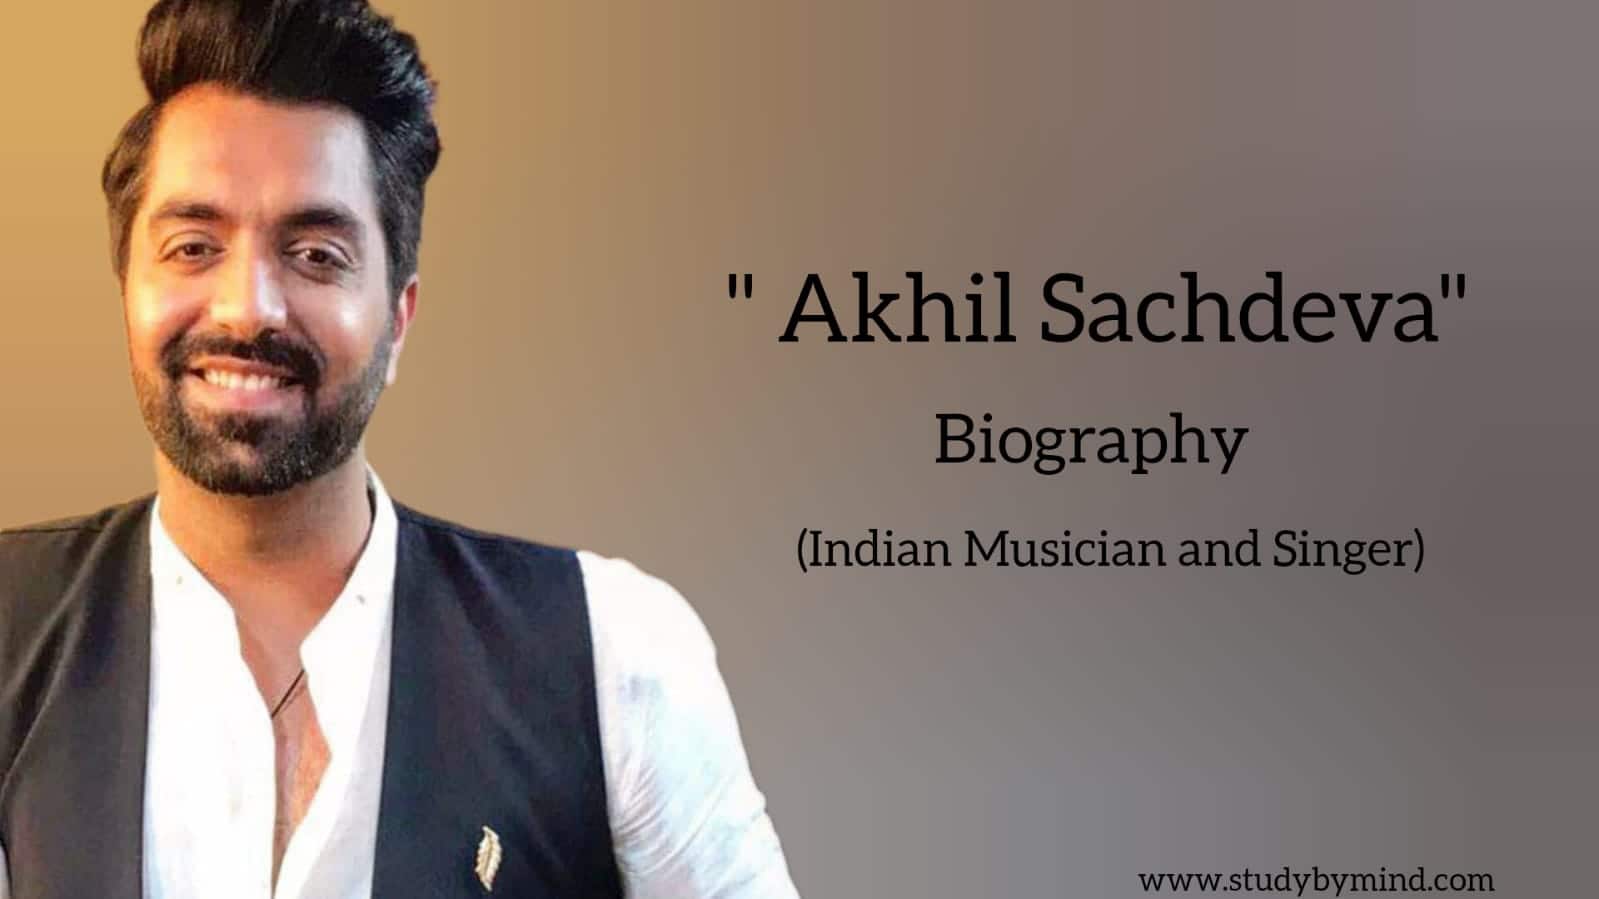 You are currently viewing Akhil Sachdeva Biography in English (Indian Singer and Music Composer)